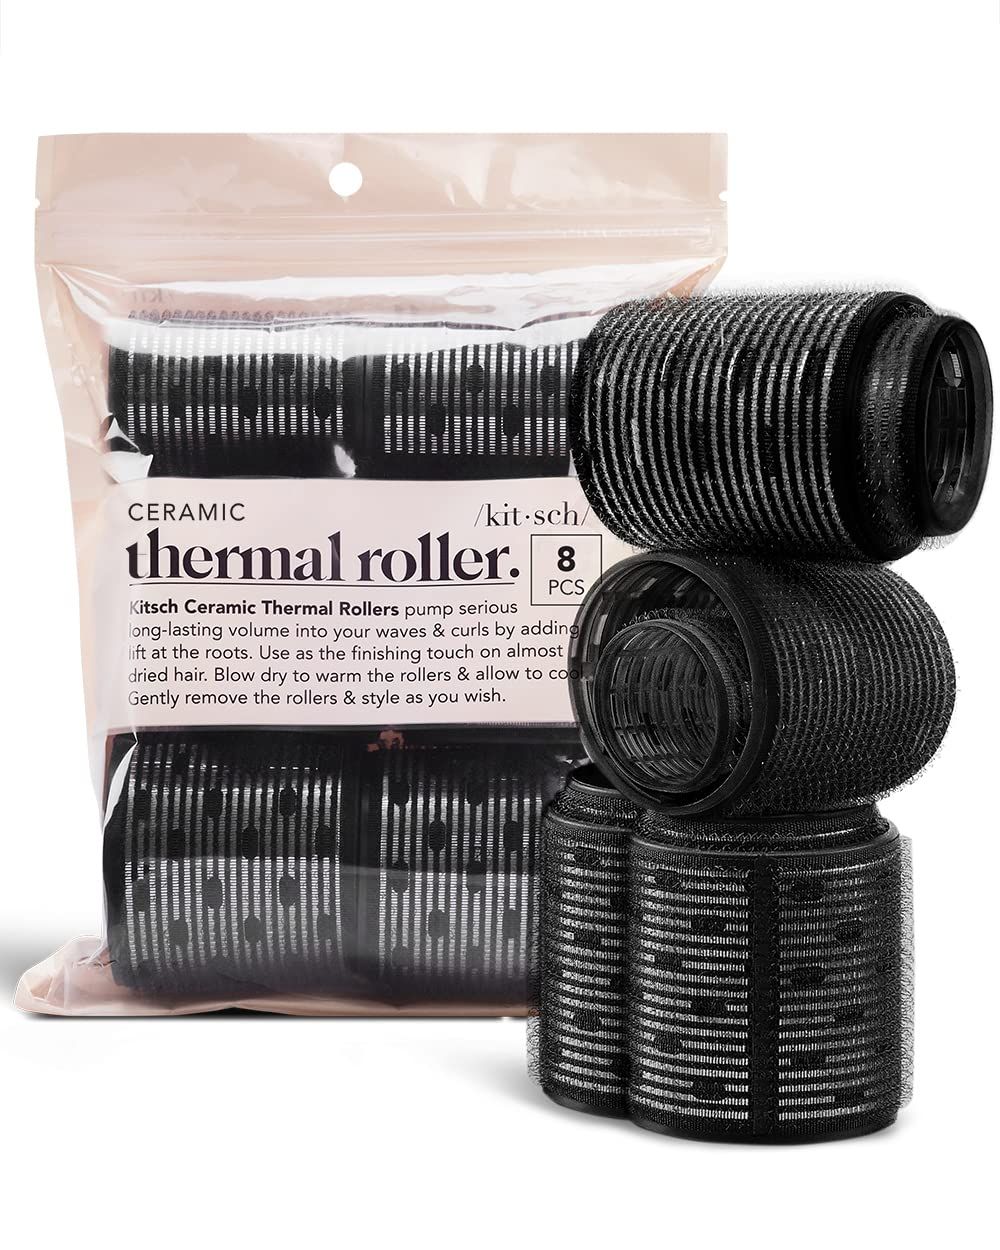 Kitsch Ceramic Thermal Hair Rollers for Short Hair - Assorted Velcro Rollers for Hair, Rollers Ha... | Amazon (US)